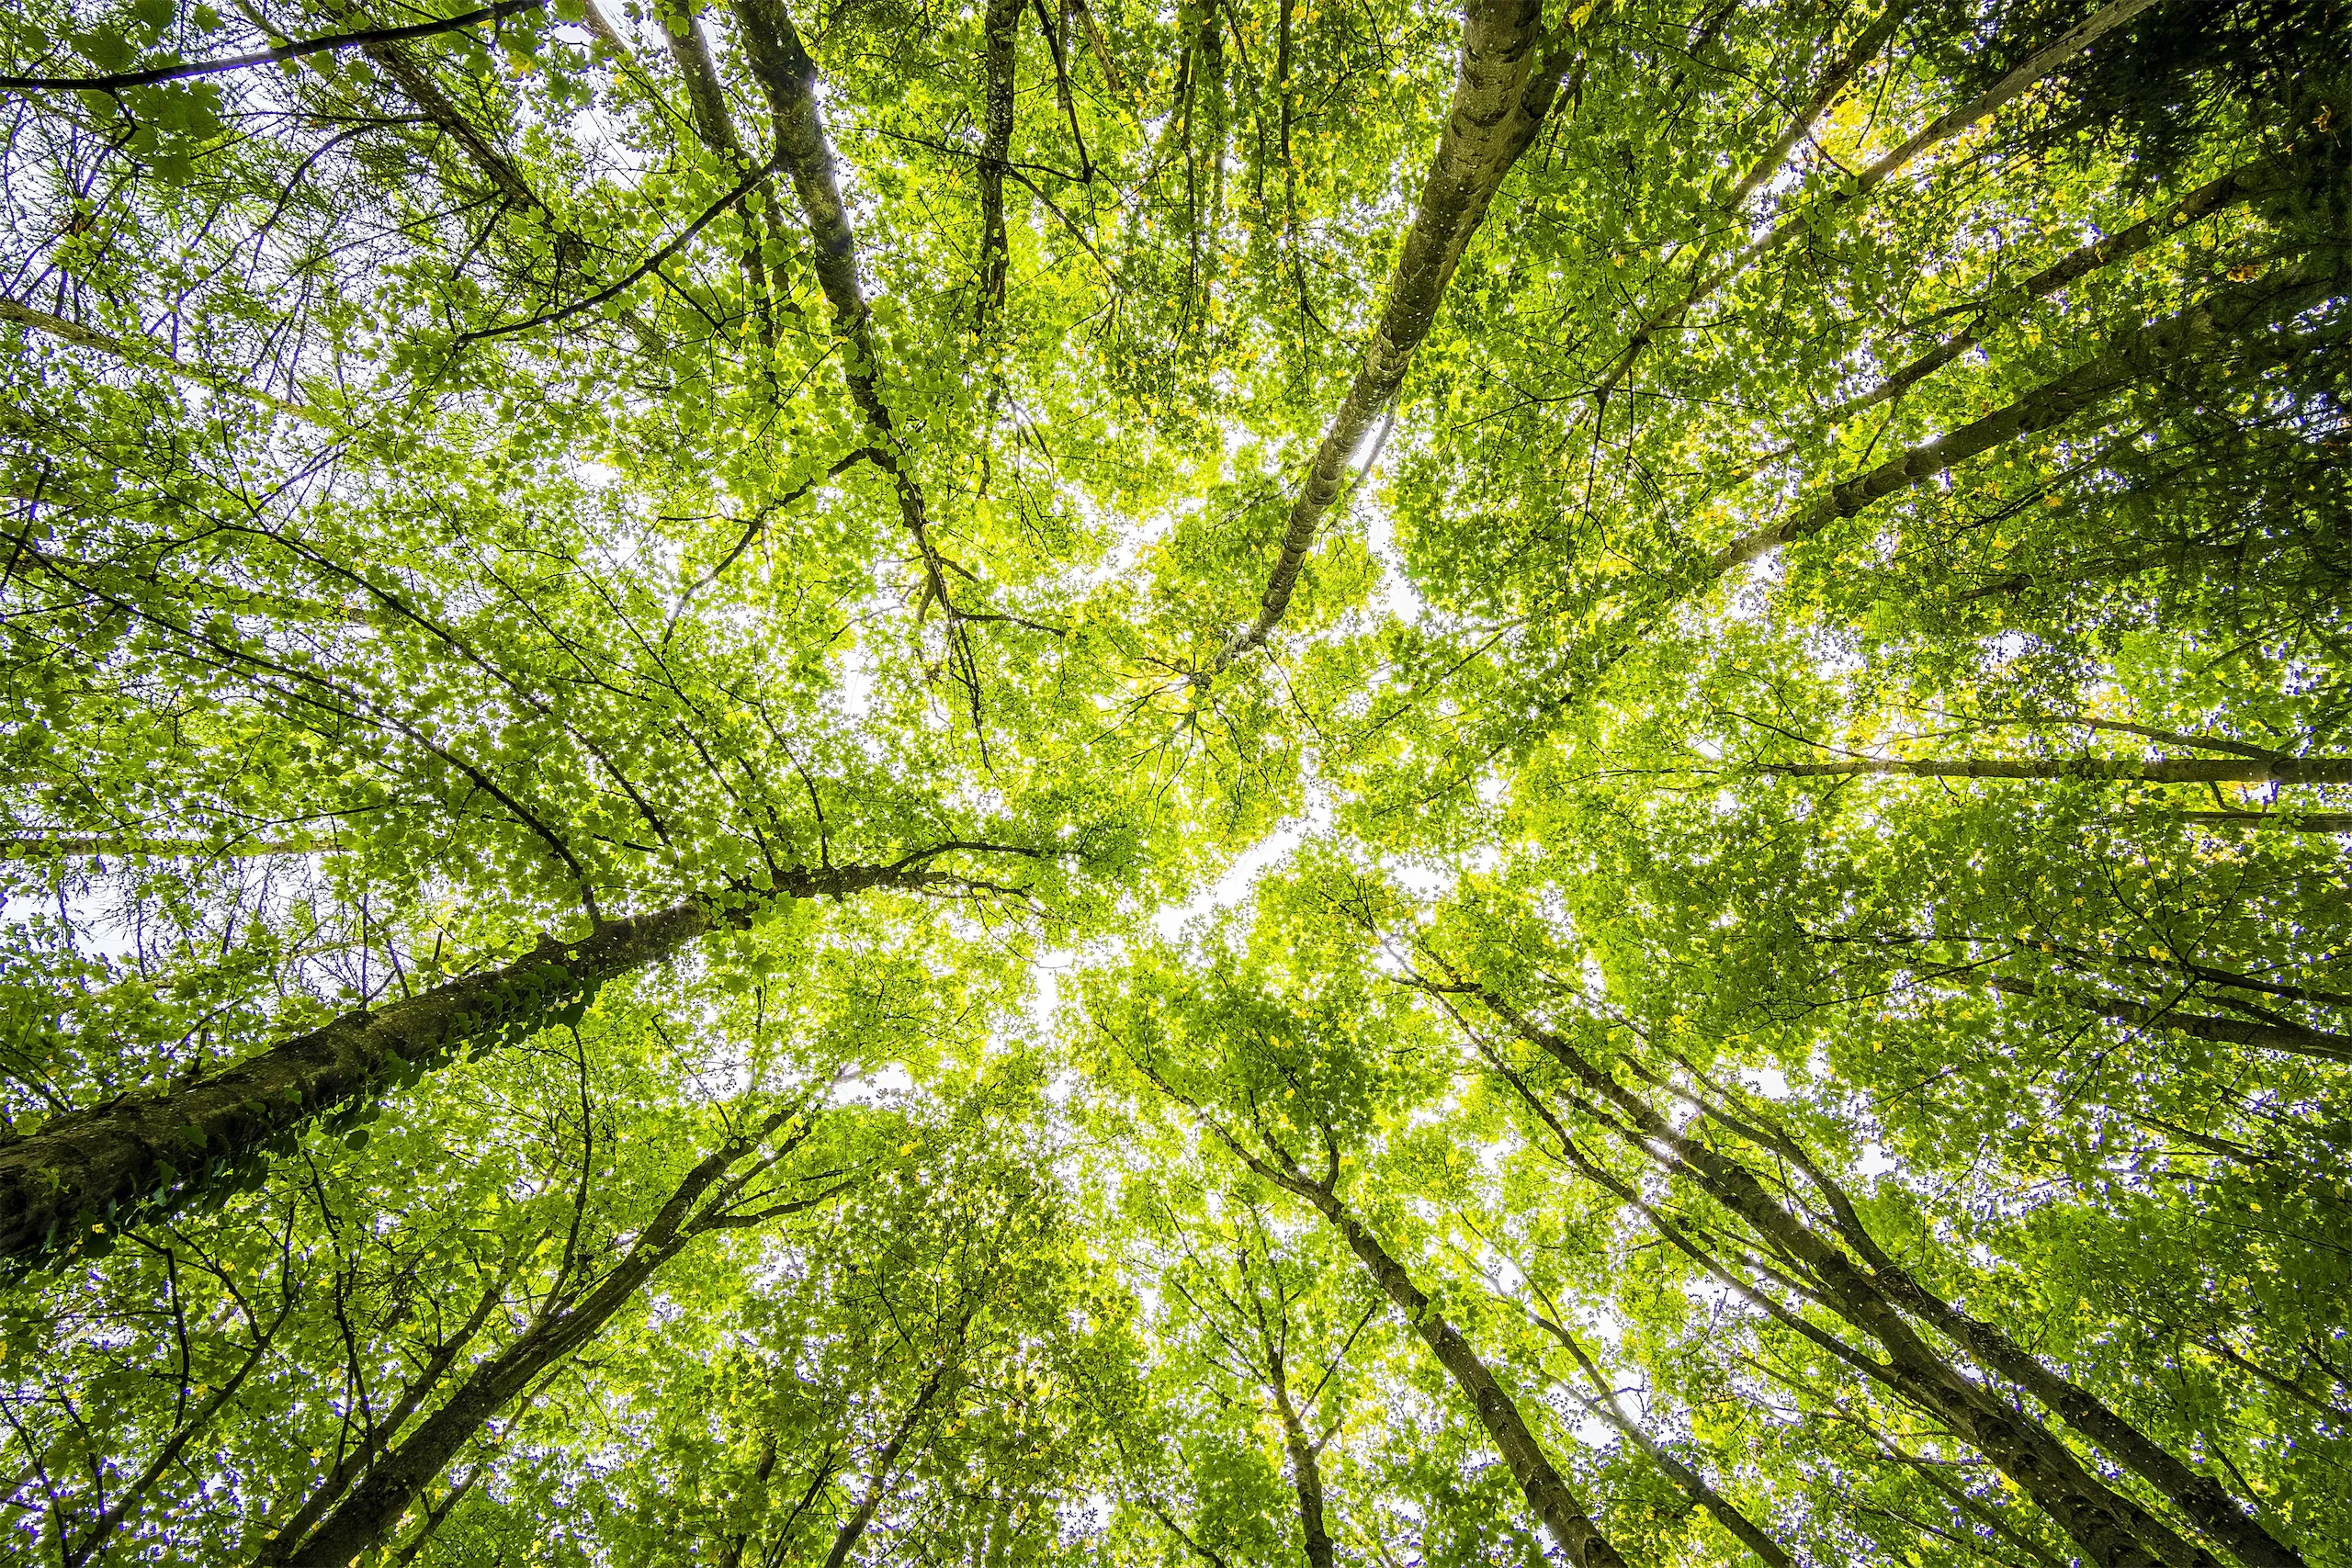 A beautiful view of the forest canopy looking up from the ground